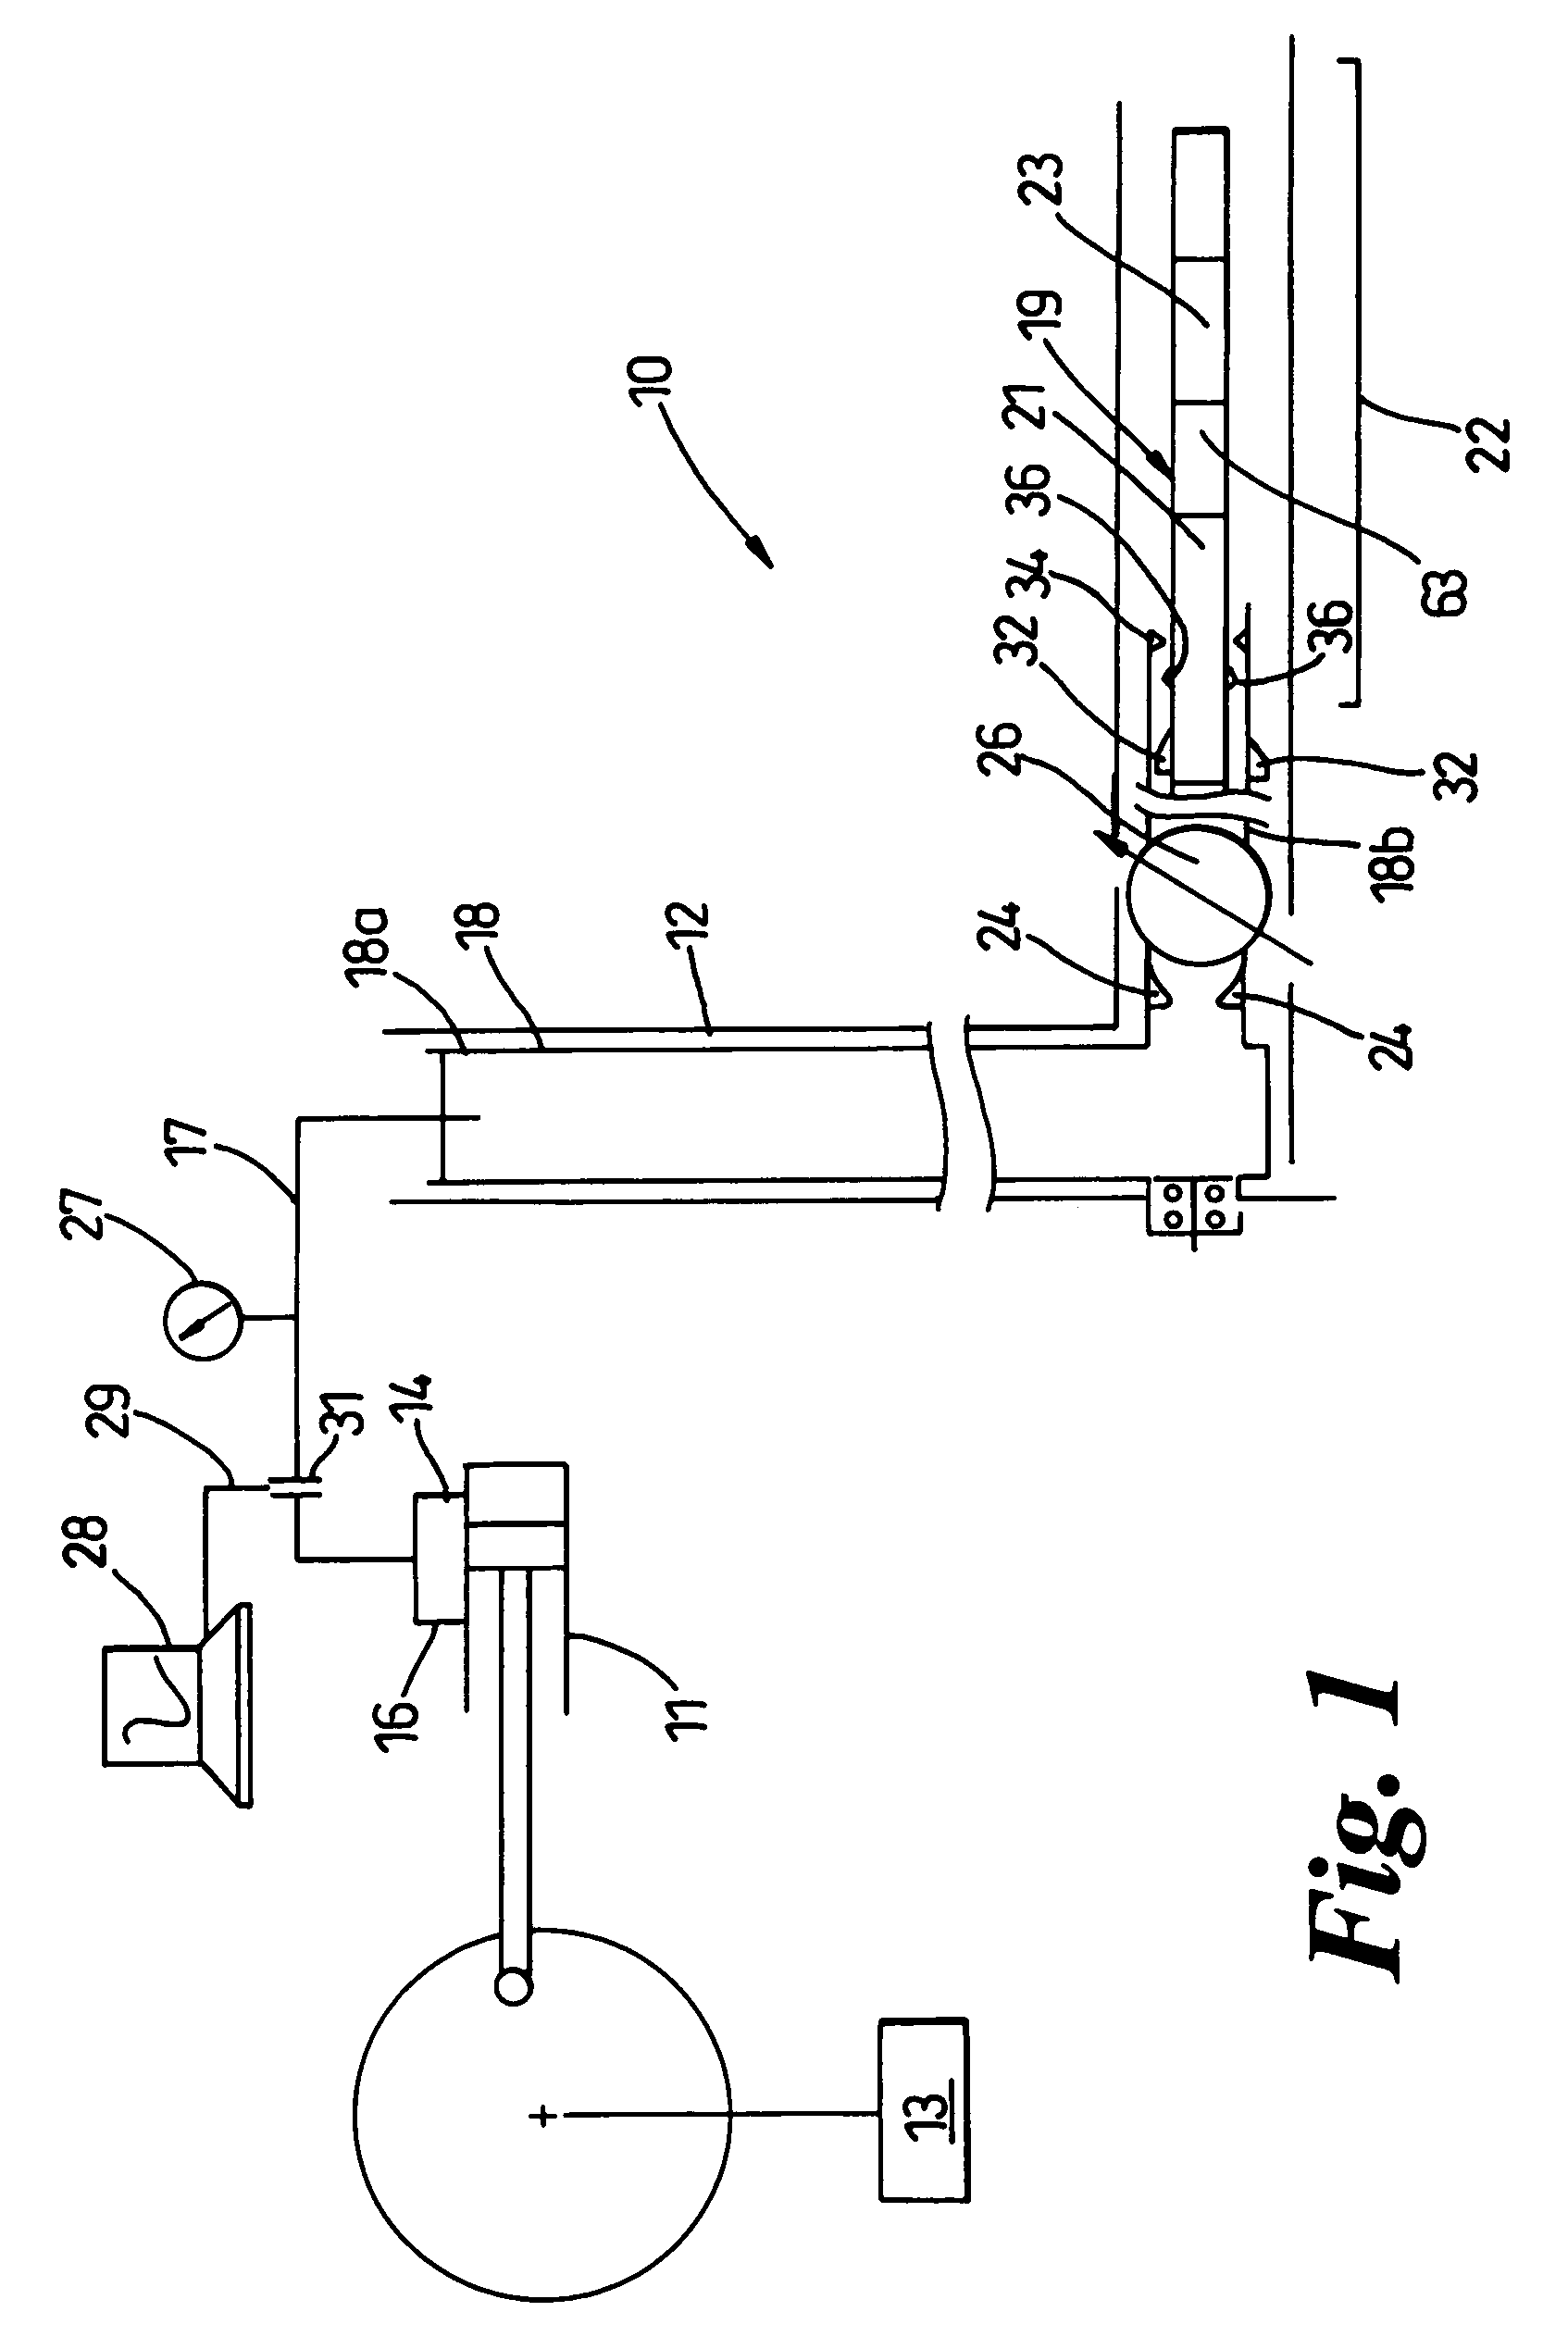 Apparatuses and methods for deploying logging tools and signalling in boreholes